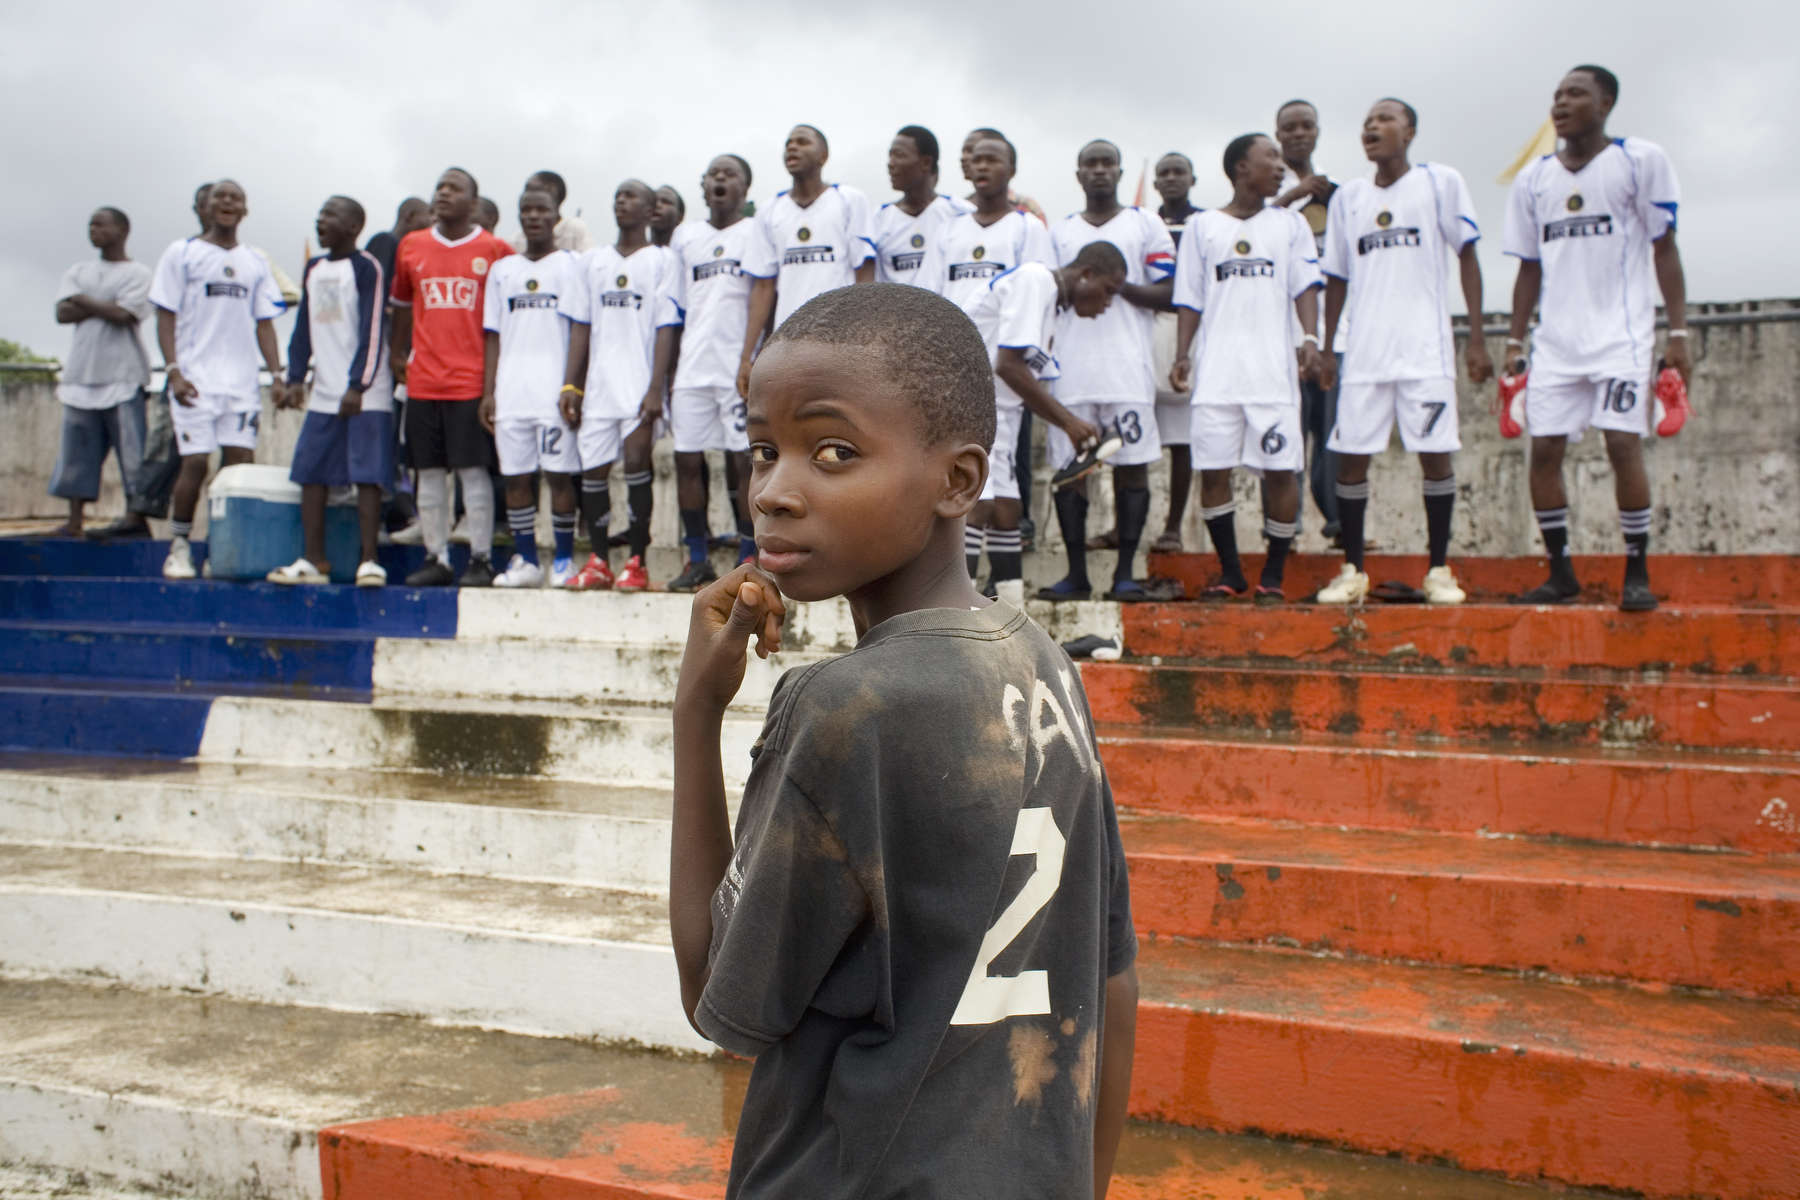 A football team sing inspirational songs from the terraces of the Antoinette Tubman Stadium, Headquarters of the Liberian Football Association. After over a decade of civil war, football is helping bring communities back together.In disaster areas, war zones and urban wastelands, football keeps humanity alive. It brings nations together and promotes unity. It encourages equality and generates pride and self-belief. It has the power to heal and to help, to motivate, to give freedom to dreams and empower a generation. There are millions of people playing the game or helping it to flourish who find that football brings a positive dimension to their lives.Away from the billionaire owned clubs with it's multi-million dollar players, Football's Hidden Story is a series of emotive human interest photographs showing the positive impact football has had at grassroot level on individuals and communities all around the world. 